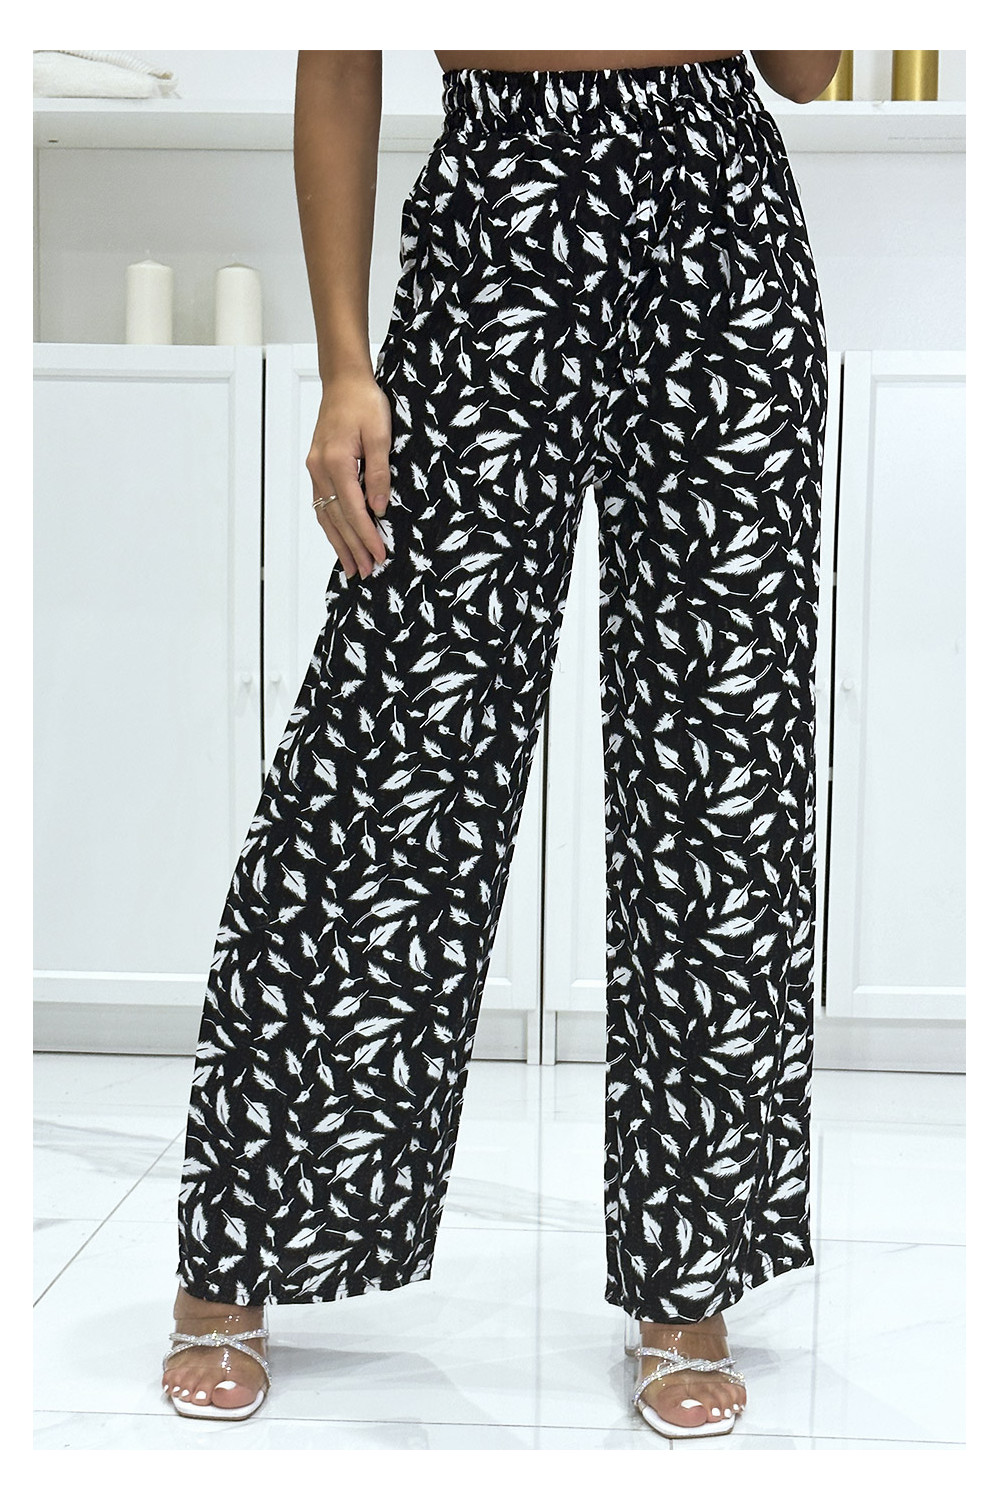 Black cotton palazzo pants with leaf pattern